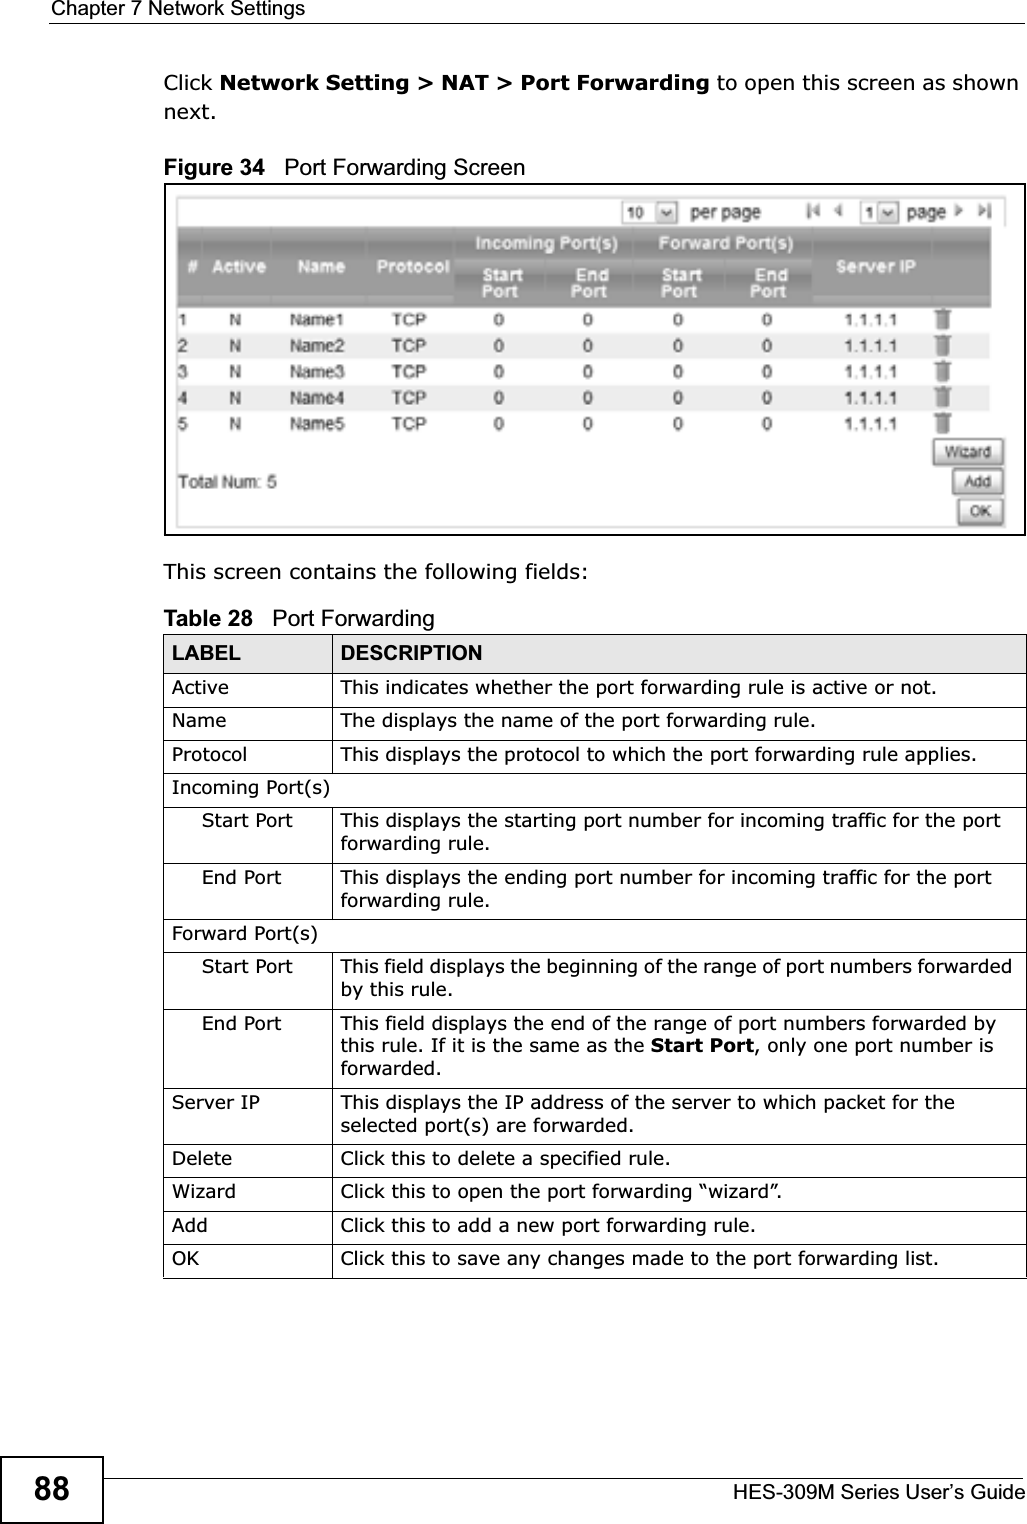 Chapter 7 Network SettingsHES-309M Series User’s Guide88Click Network Setting &gt; NAT &gt; Port Forwarding to open this screen as shown next.Figure 34   Port Forwarding ScreenThis screen contains the following fields:Table 28   Port ForwardingLABEL DESCRIPTIONActive This indicates whether the port forwarding rule is active or not.Name The displays the name of the port forwarding rule.Protocol This displays the protocol to which the port forwarding rule applies.Incoming Port(s)Start Port This displays the starting port number for incoming traffic for the port forwarding rule.End Port This displays the ending port number for incoming traffic for the port forwarding rule.Forward Port(s)Start Port This field displays the beginning of the range of port numbers forwarded by this rule.End Port This field displays the end of the range of port numbers forwarded by this rule. If it is the same as the Start Port, only one port number is forwarded.Server IP This displays the IP address of the server to which packet for the selected port(s) are forwarded.Delete Click this to delete a specified rule.Wizard Click this to open the port forwarding “wizard”.Add Click this to add a new port forwarding rule.OK Click this to save any changes made to the port forwarding list.